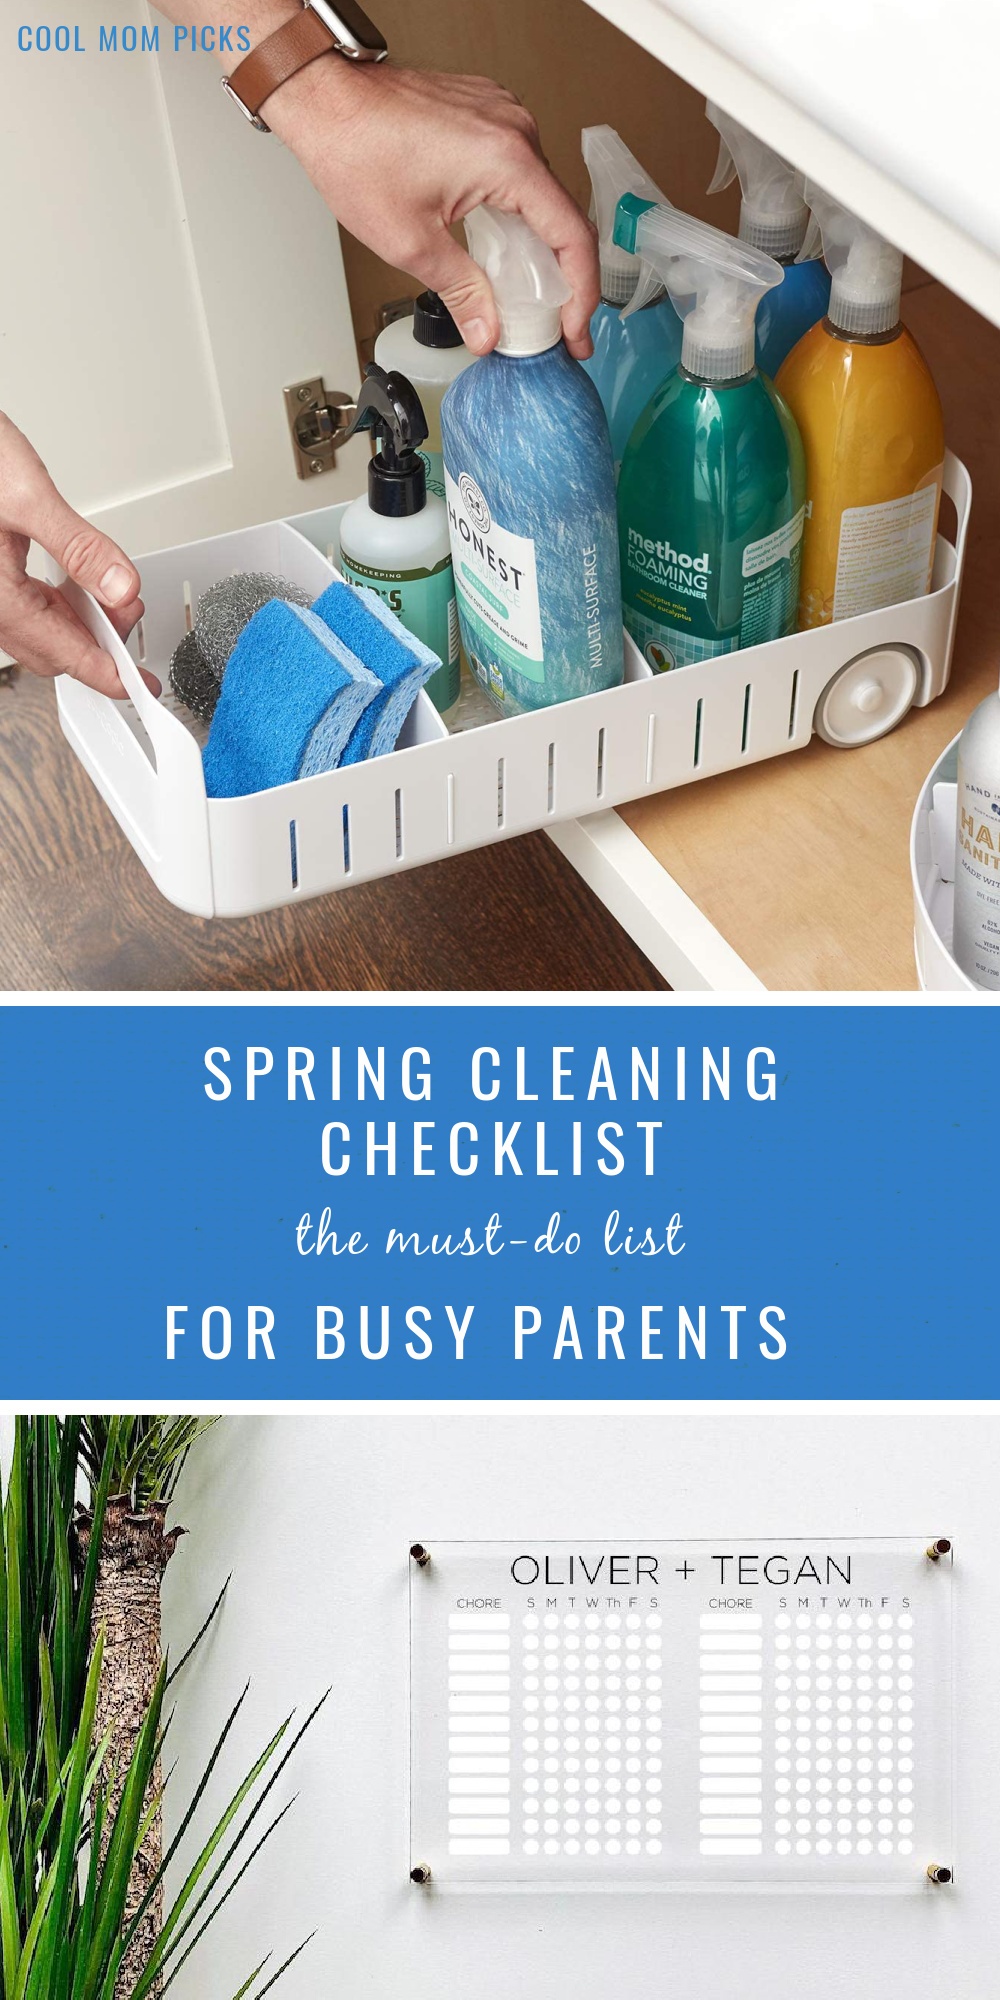 The Cool Mom Picks spring cleaning checklist for busy parents